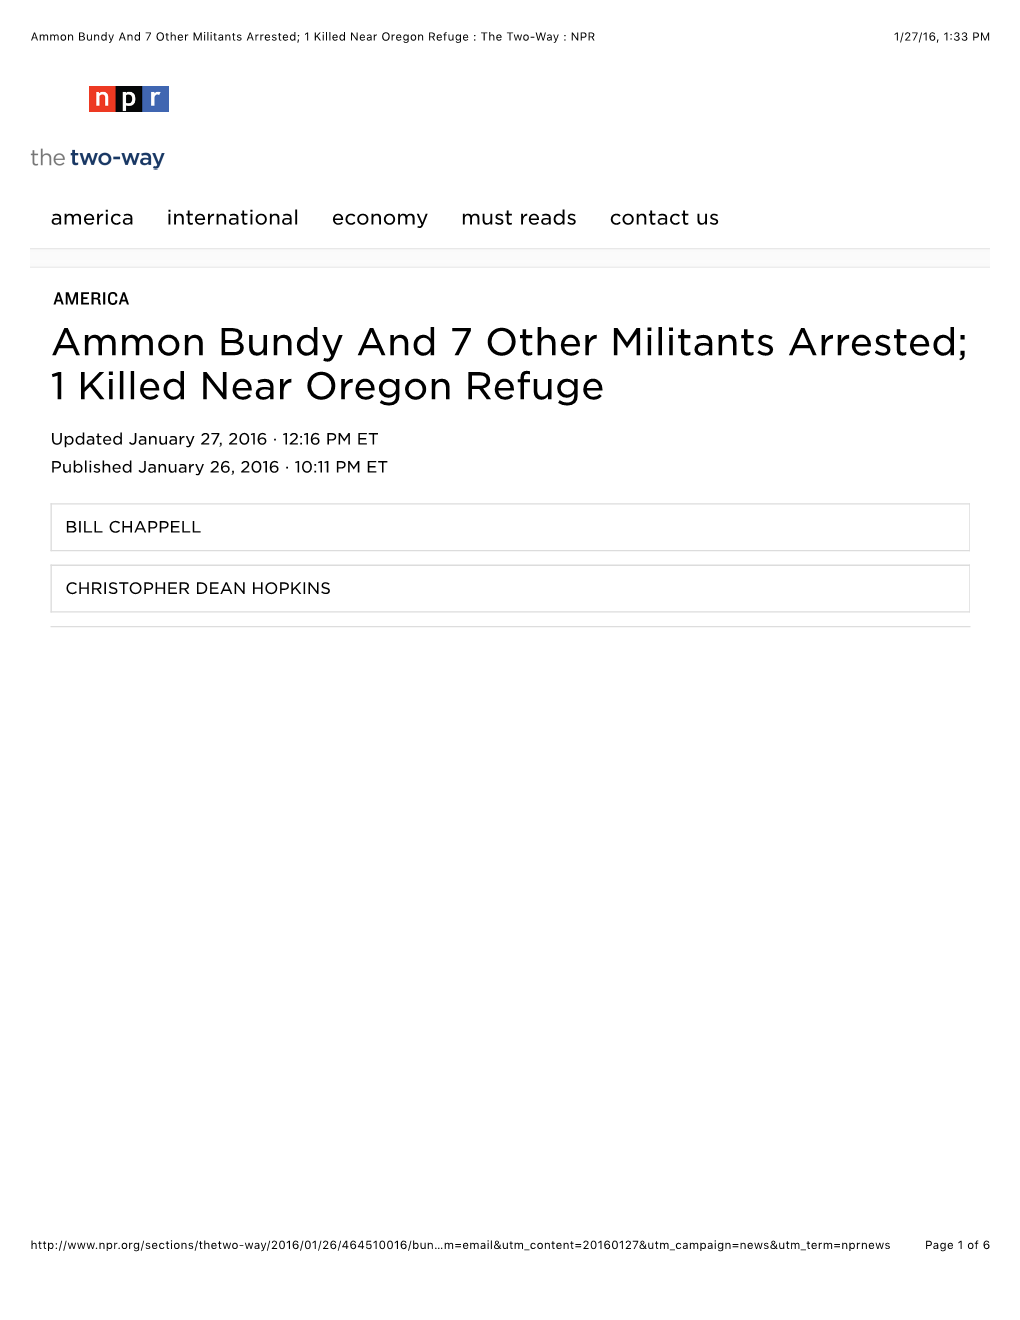 Ammon Bundy and 7 Other Militants Arrested; 1 Killed Near Oregon Refuge : the Two-Way : NPR 1/27/16, 1:33 PM